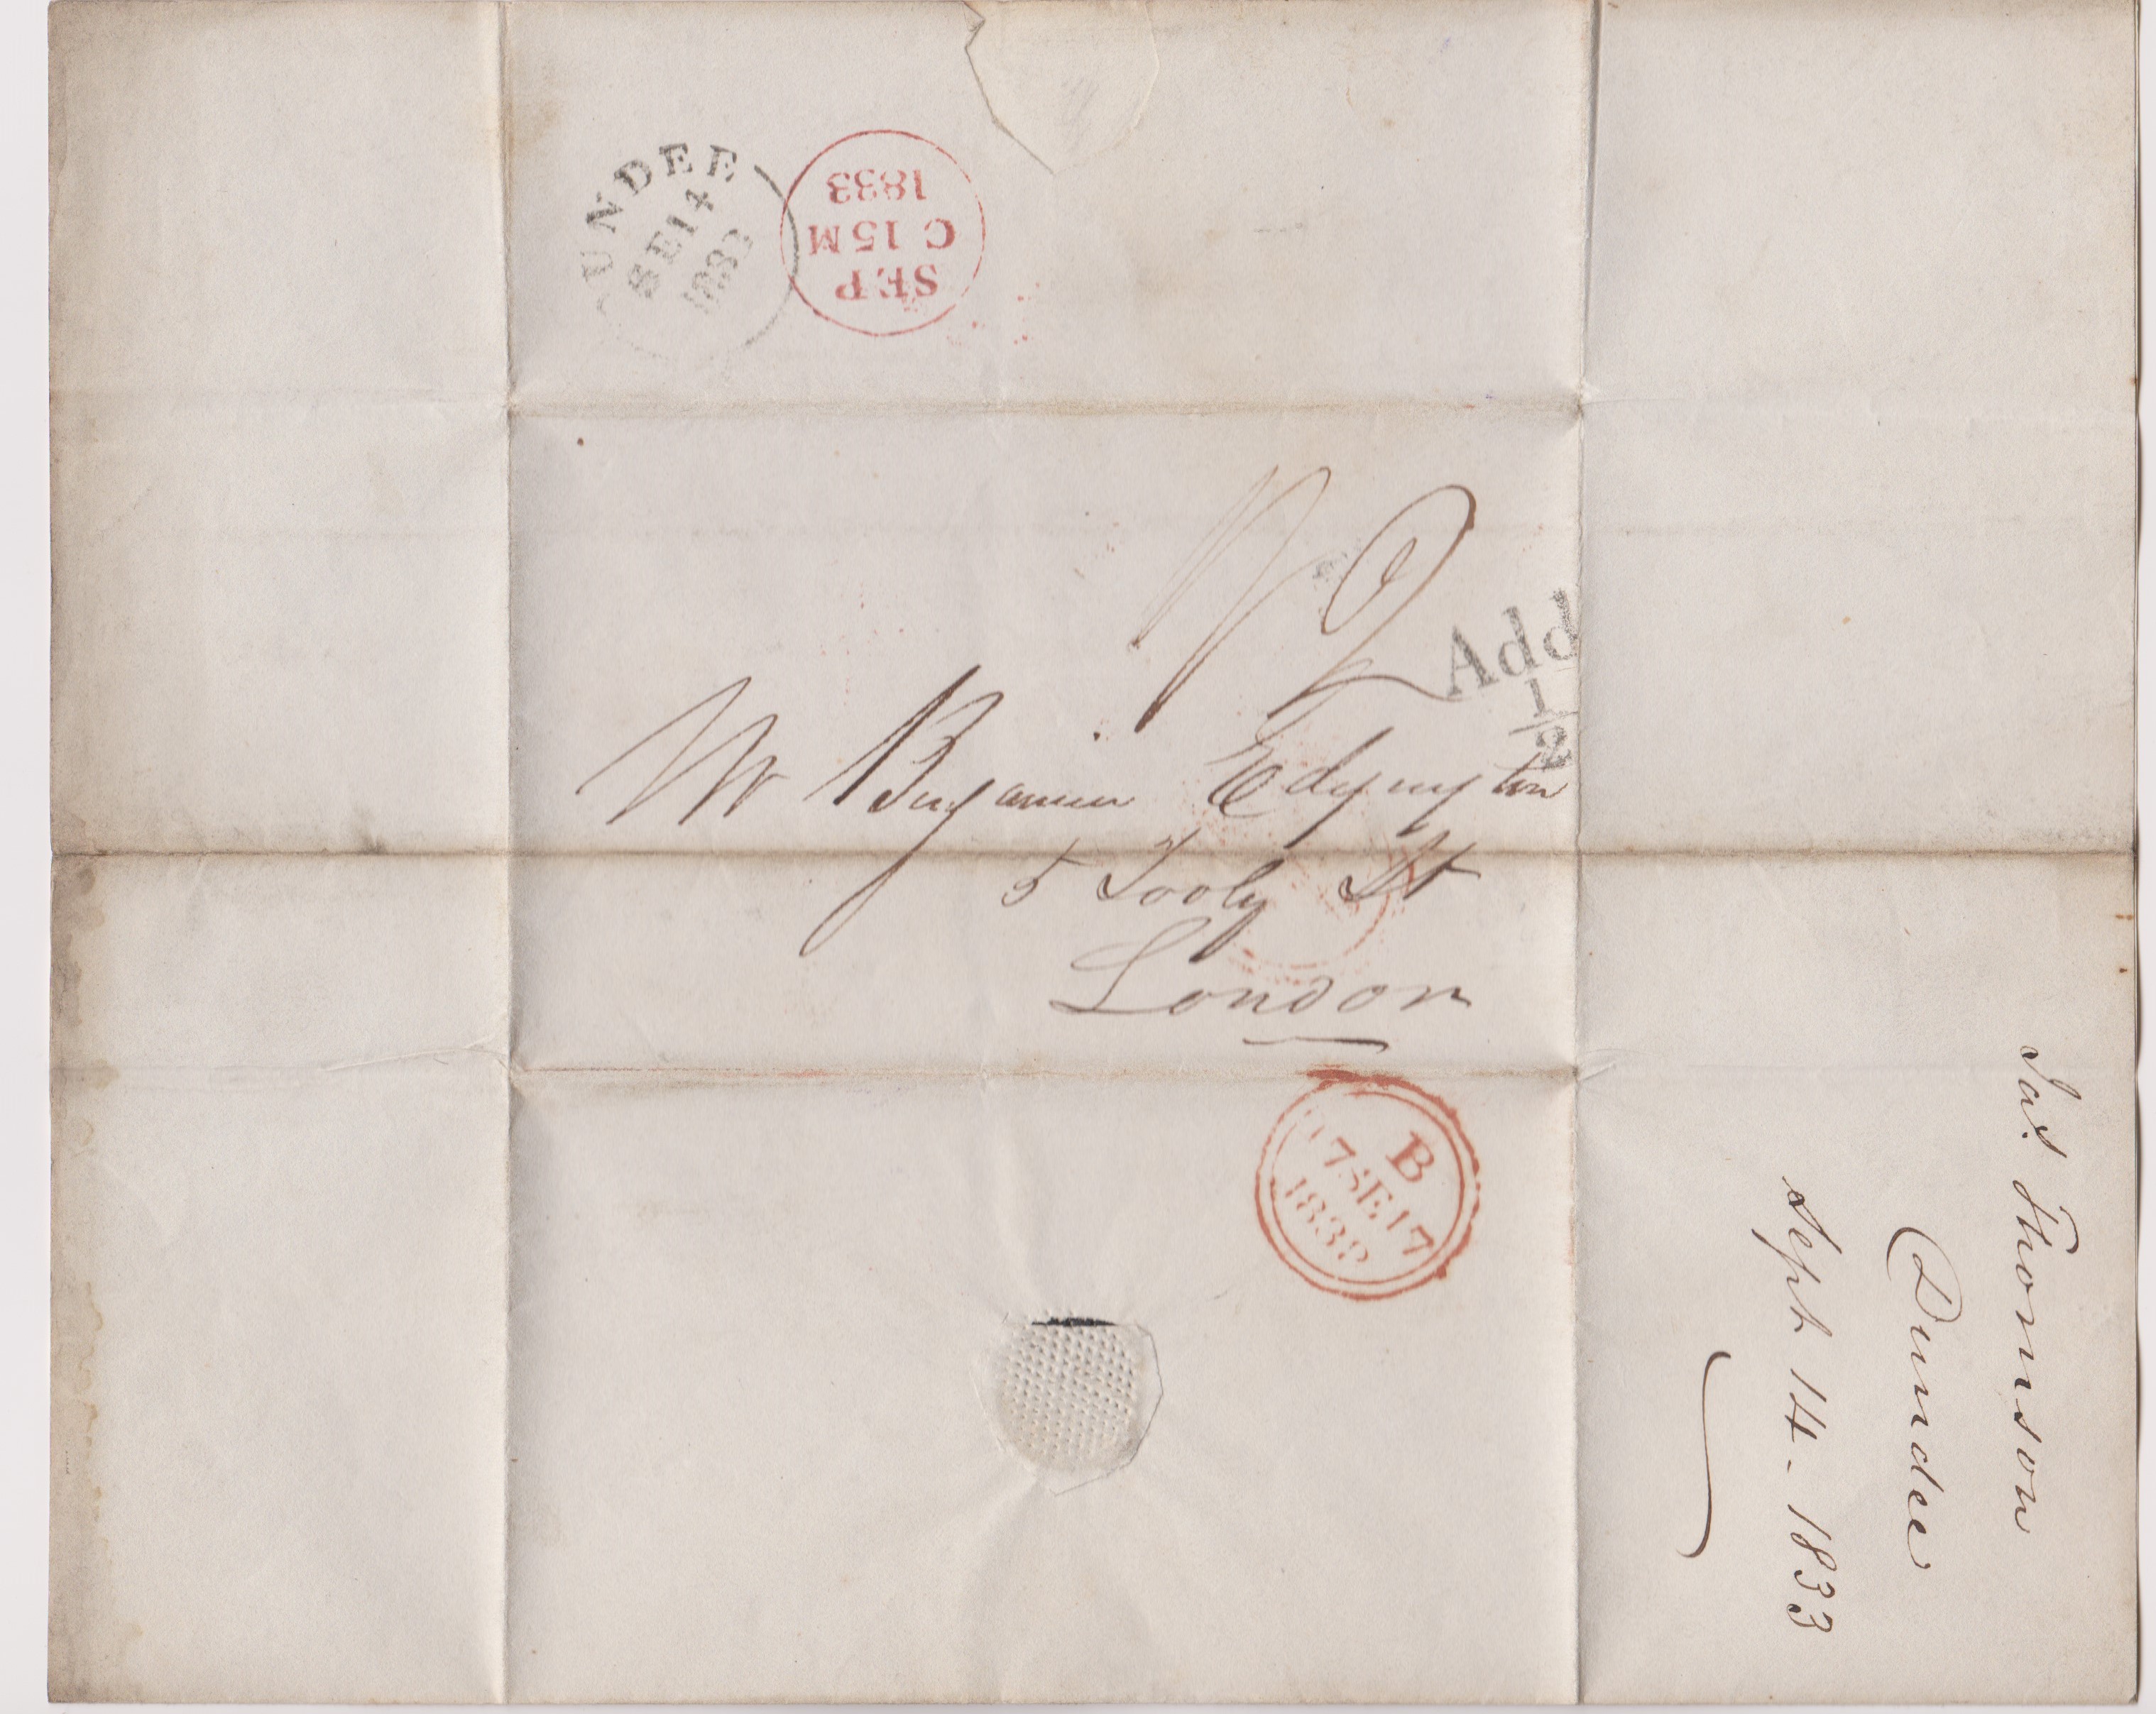 Great Britain 1833-Postal History EL dated 124th Sept 1833 Dundee posted to London-manuscript 2